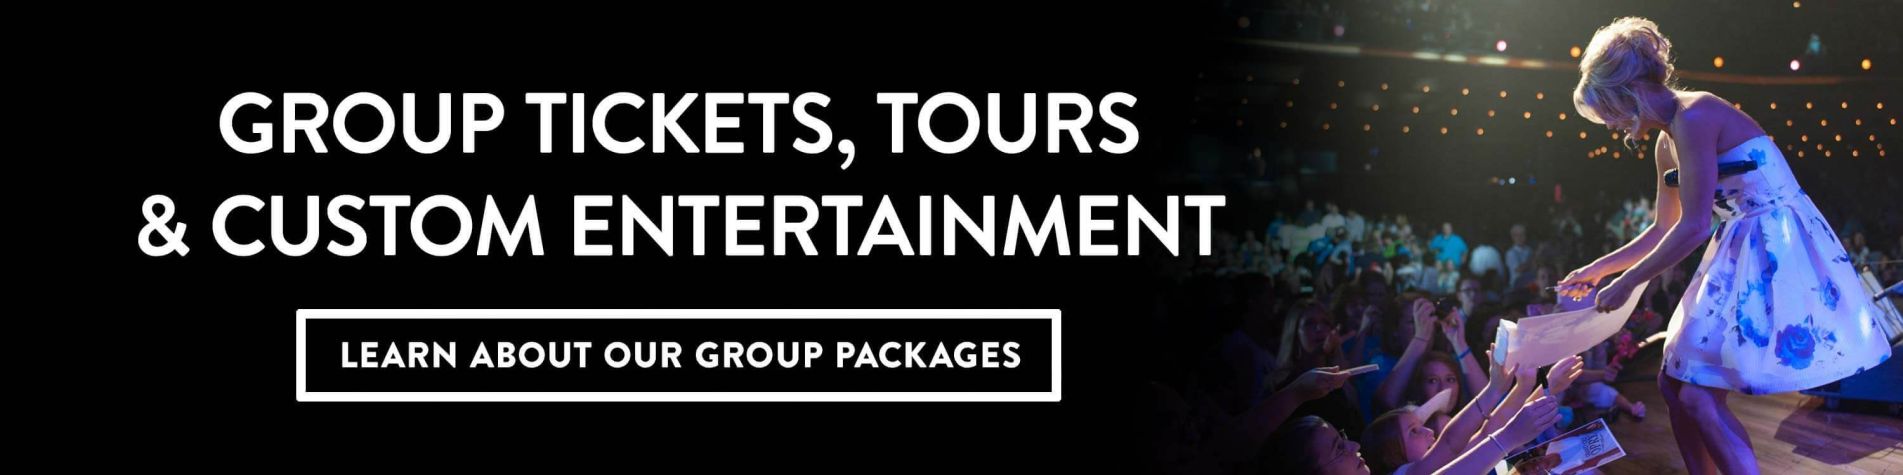 Group Tickets, Tours, and Custom Entertainment - Learn About Our Group Packages